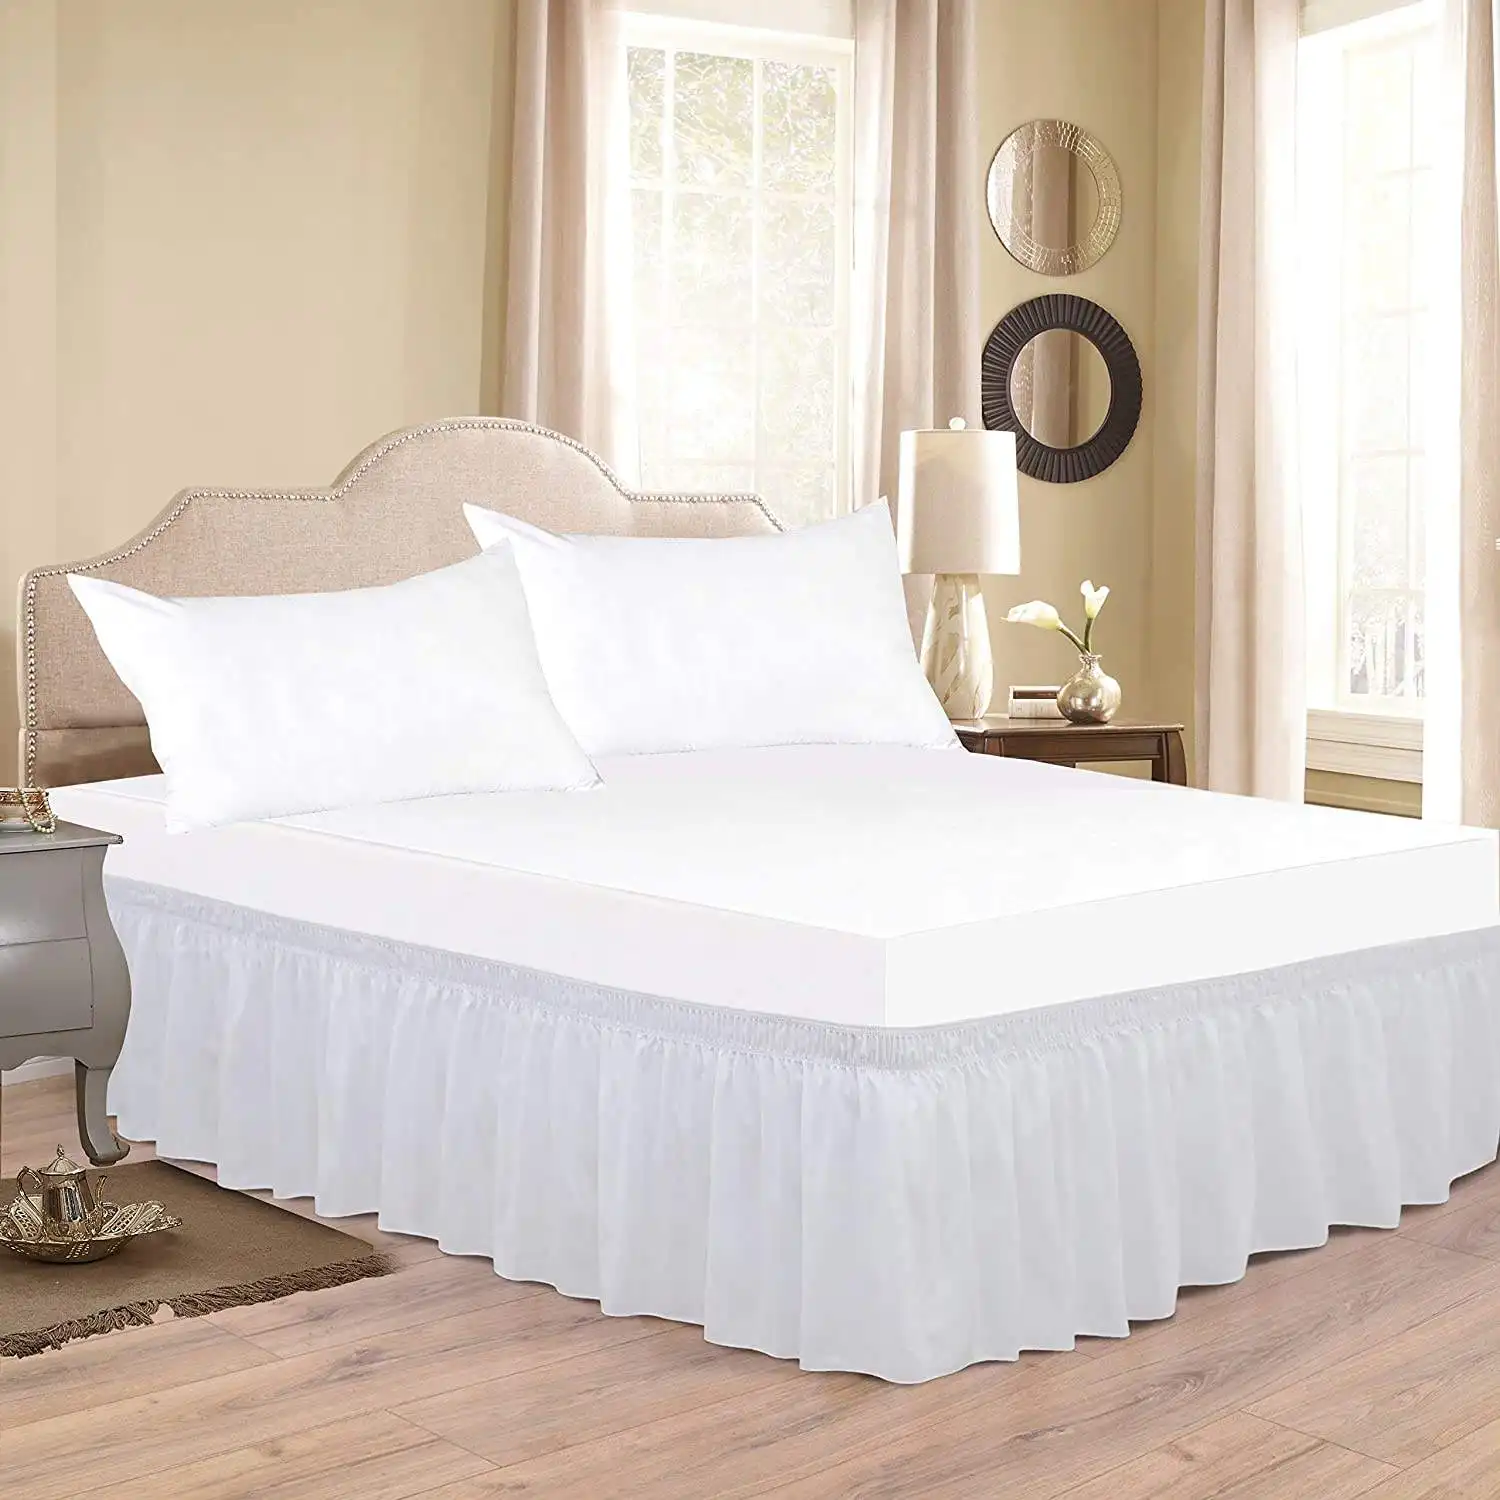 Wrap Around Ruffled Bed Skirt with Adjustable Elastic Belt Drop Easy to Put On Wrinkle Free Bedskirt Dust Ruffles